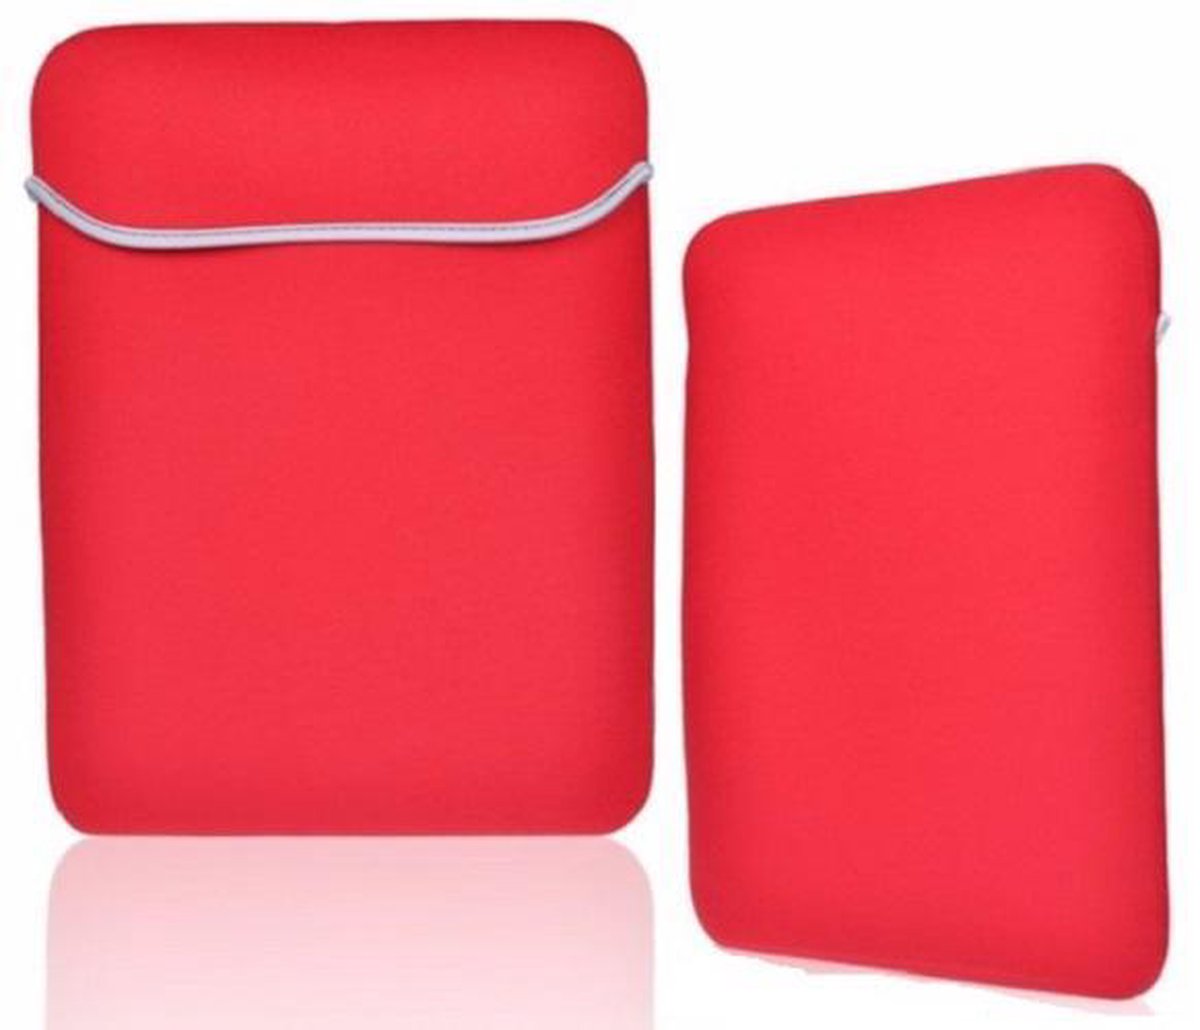 Universele Laptop Sleeve voor 11 inch laptops o.a. MacBook 11.6 inch - Rood